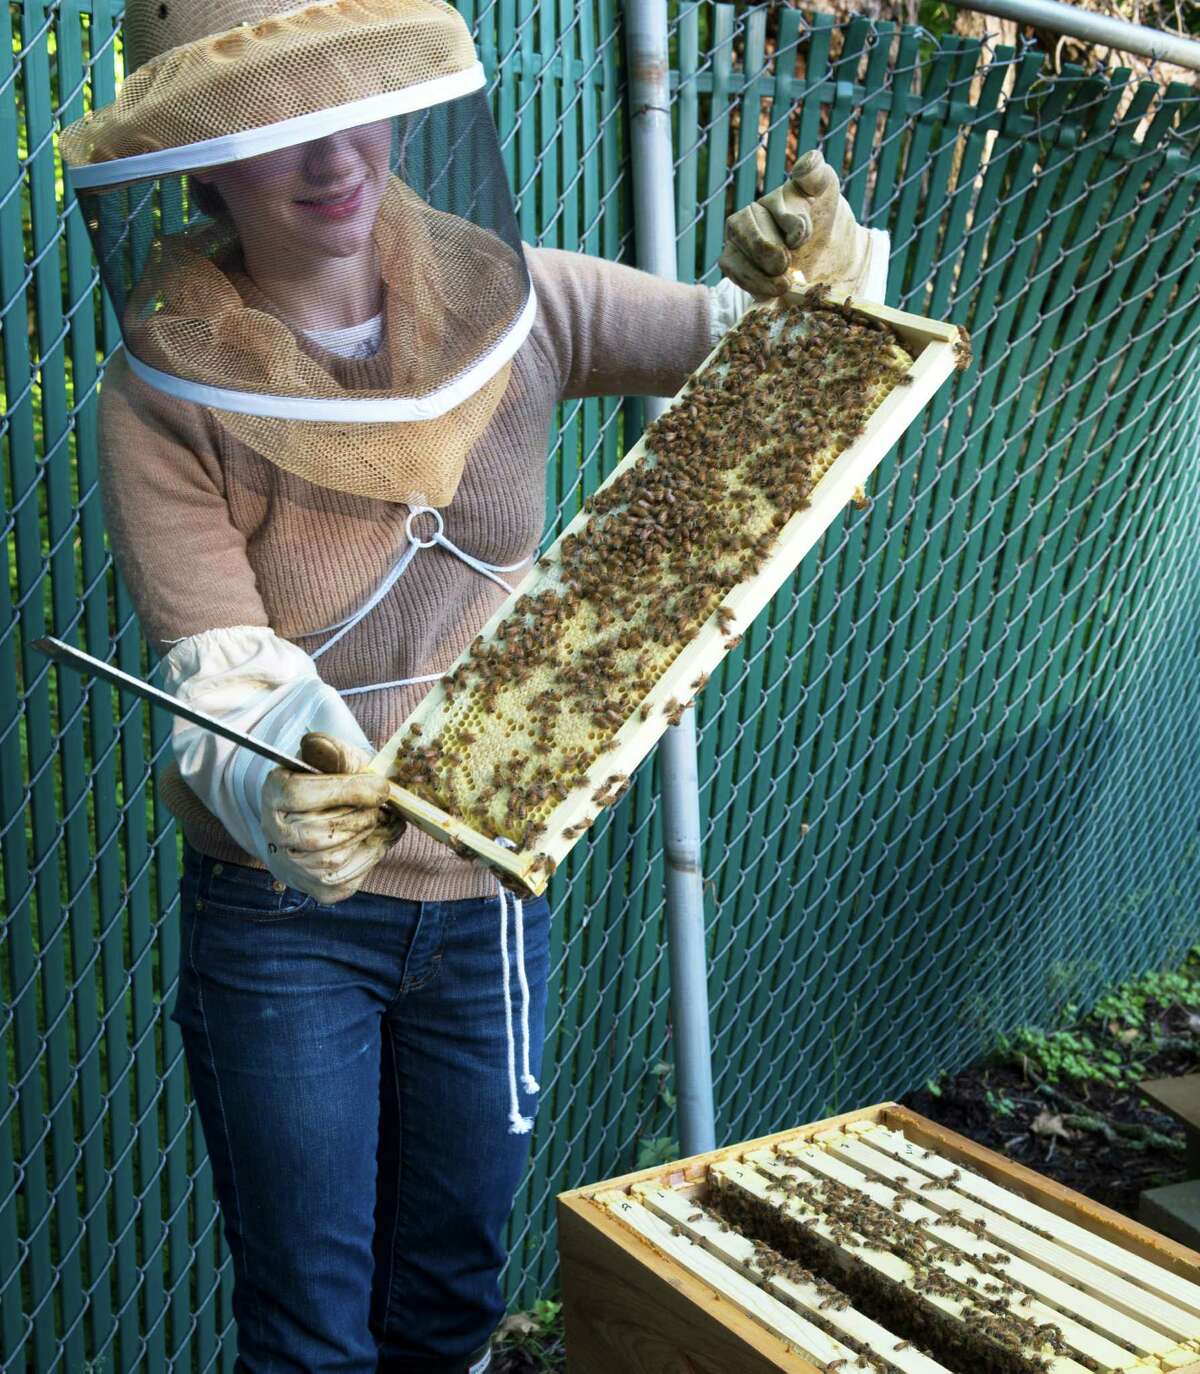 Honey provided colonial families with medicine, sweetner, preservative and beeswax. To illustrate the importance of bee keeping in colonial times, the Ogden House gardens support beehives, here being examined by beekeeper Tess Brown.